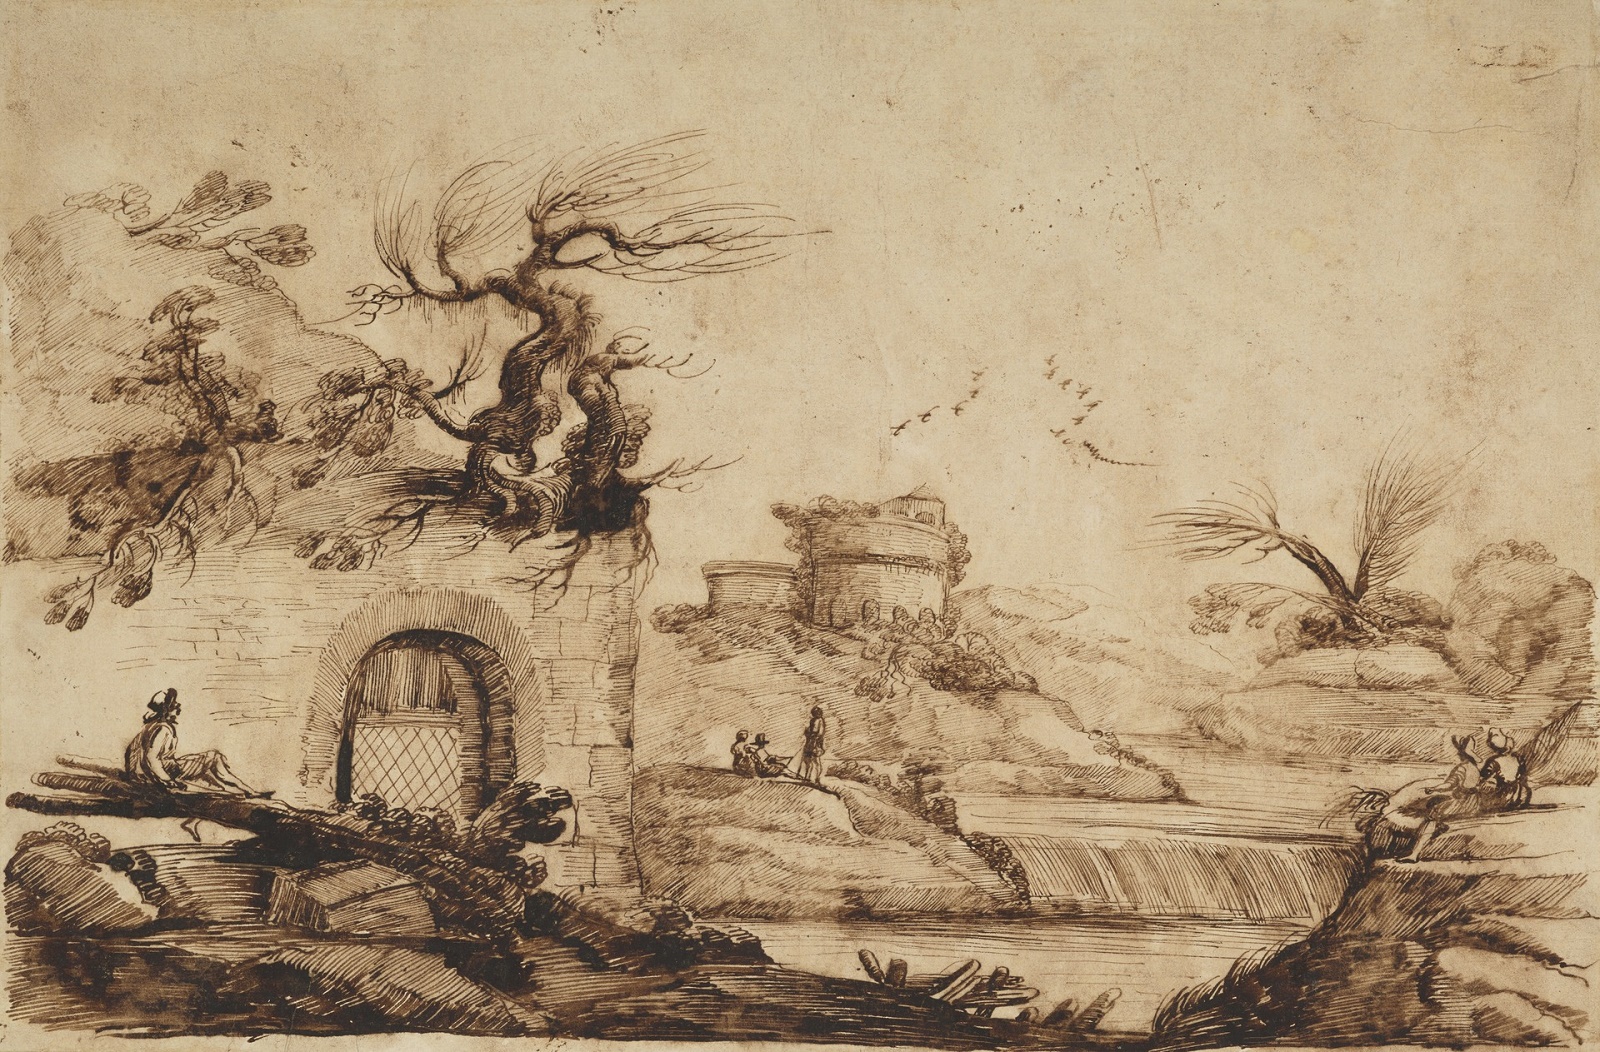 Spencer Alley: Landscape Drawings by Guercino (Cambridge and Edinburgh)